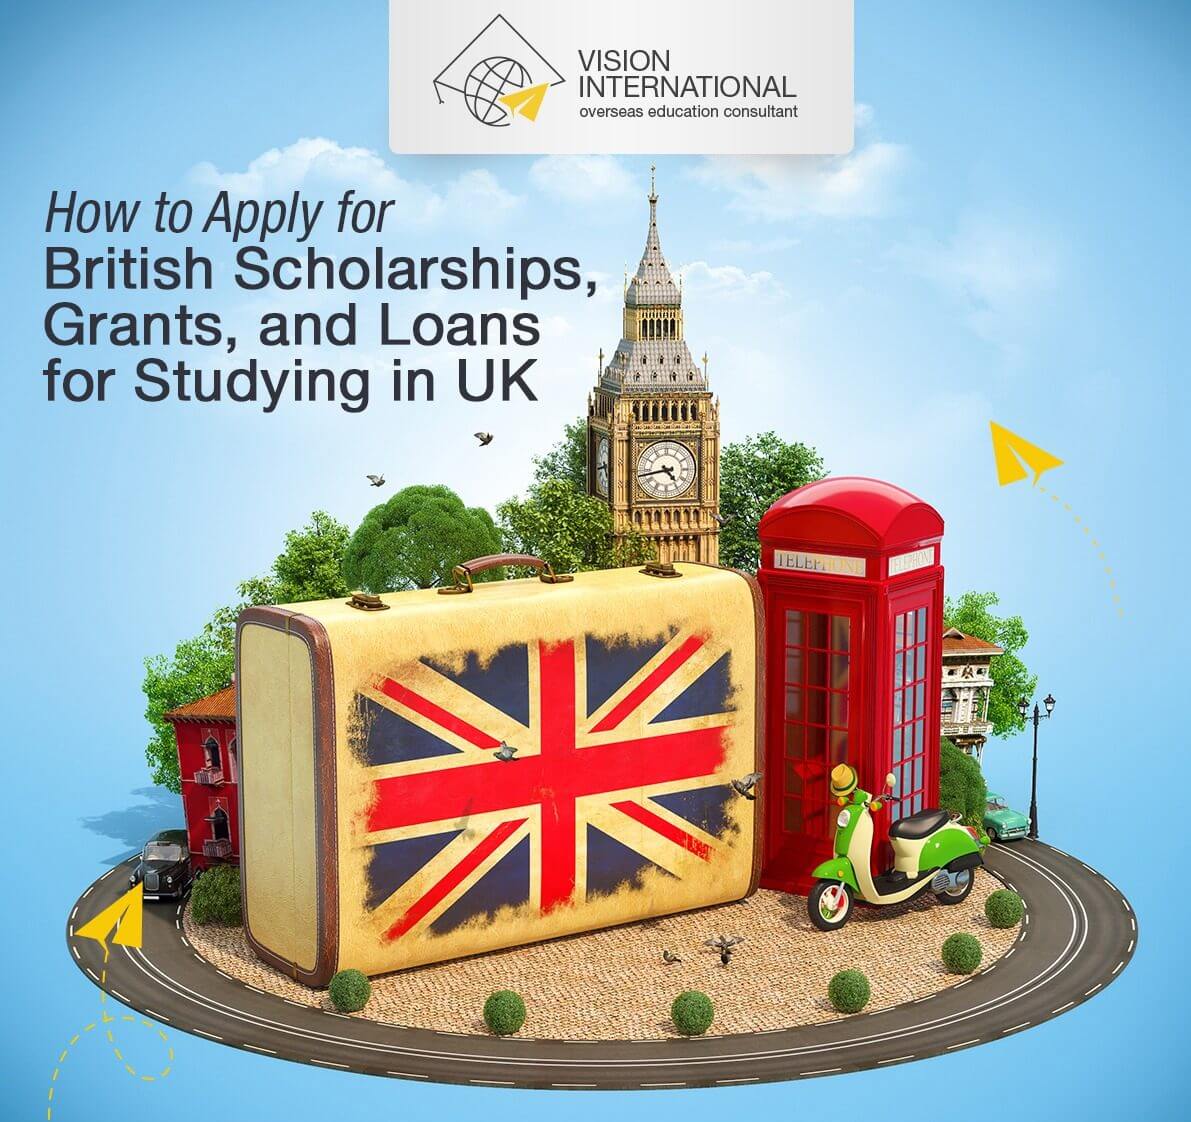 How to Apply for British Scholarships, Grants, and Loans for Studying in the UK